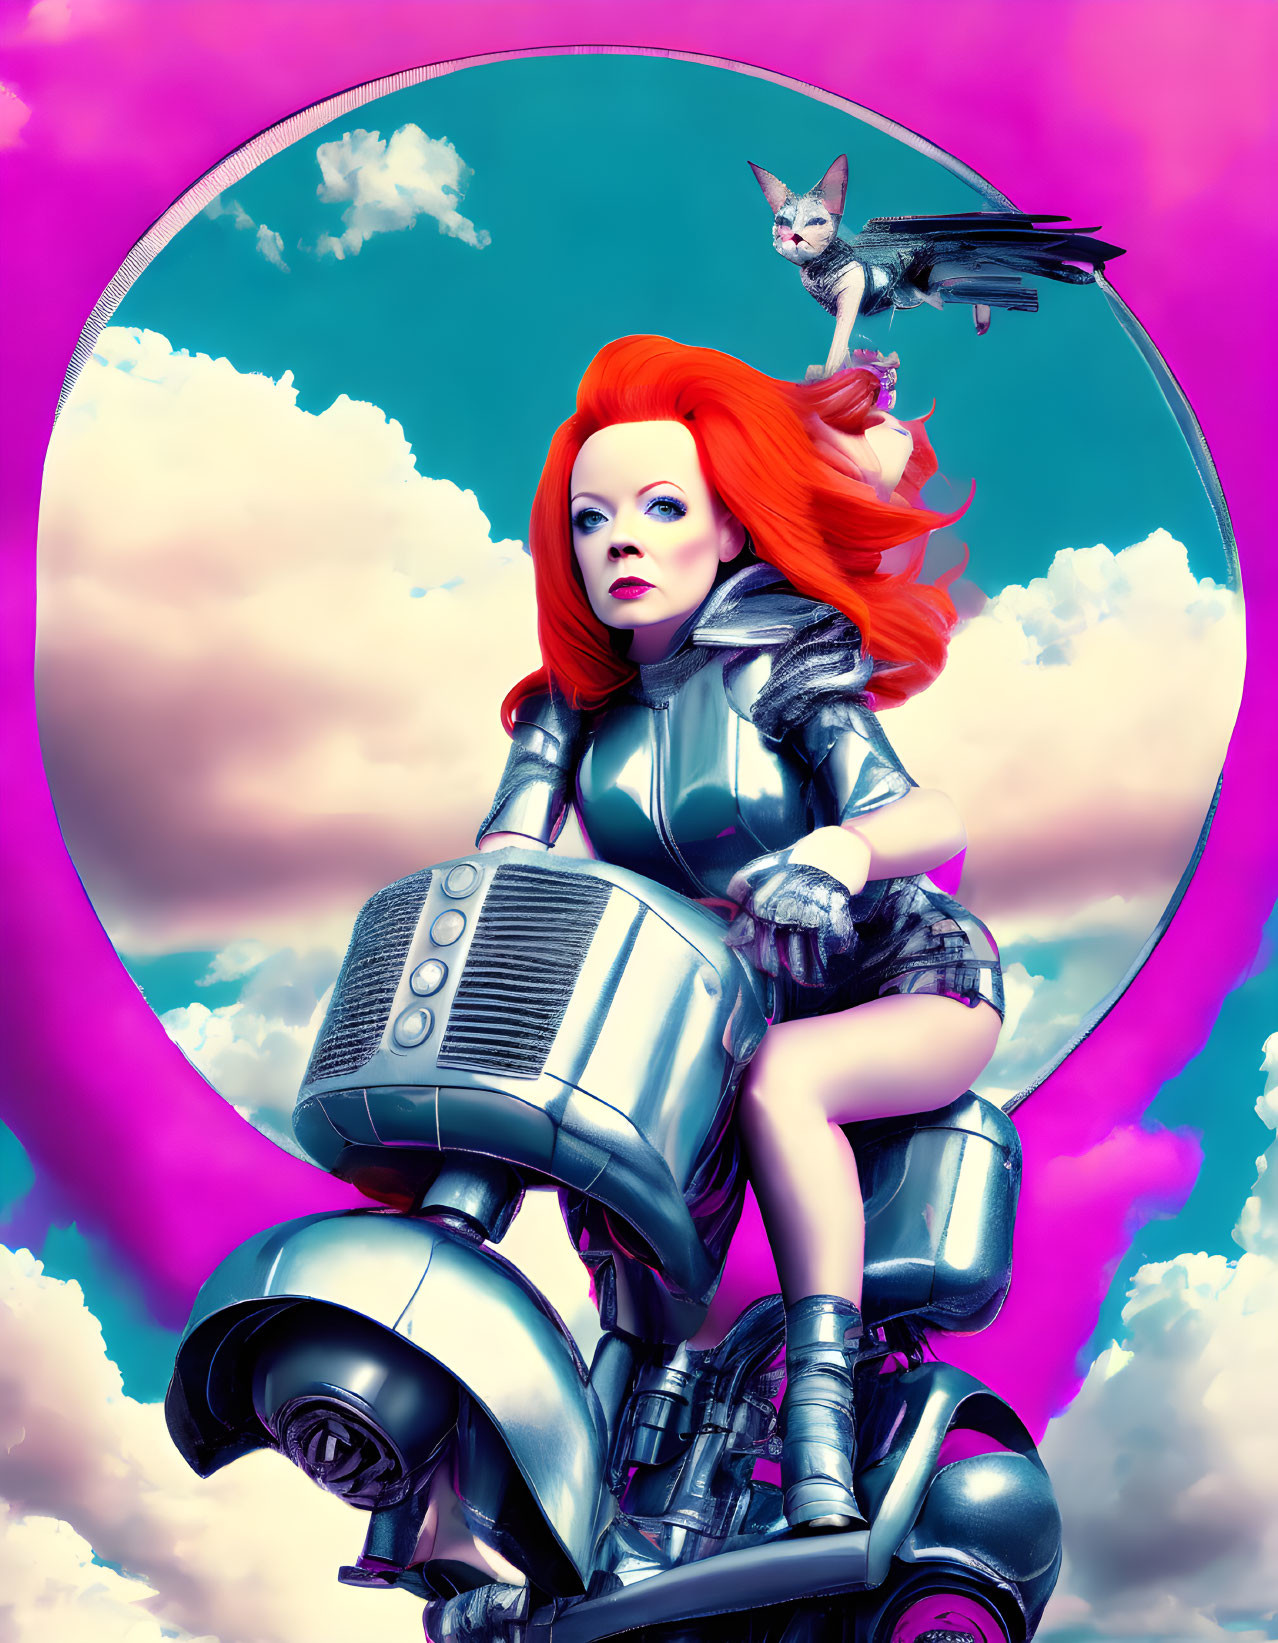 Bright red-haired woman in metallic outfit rides silver scooter with cat through clouds